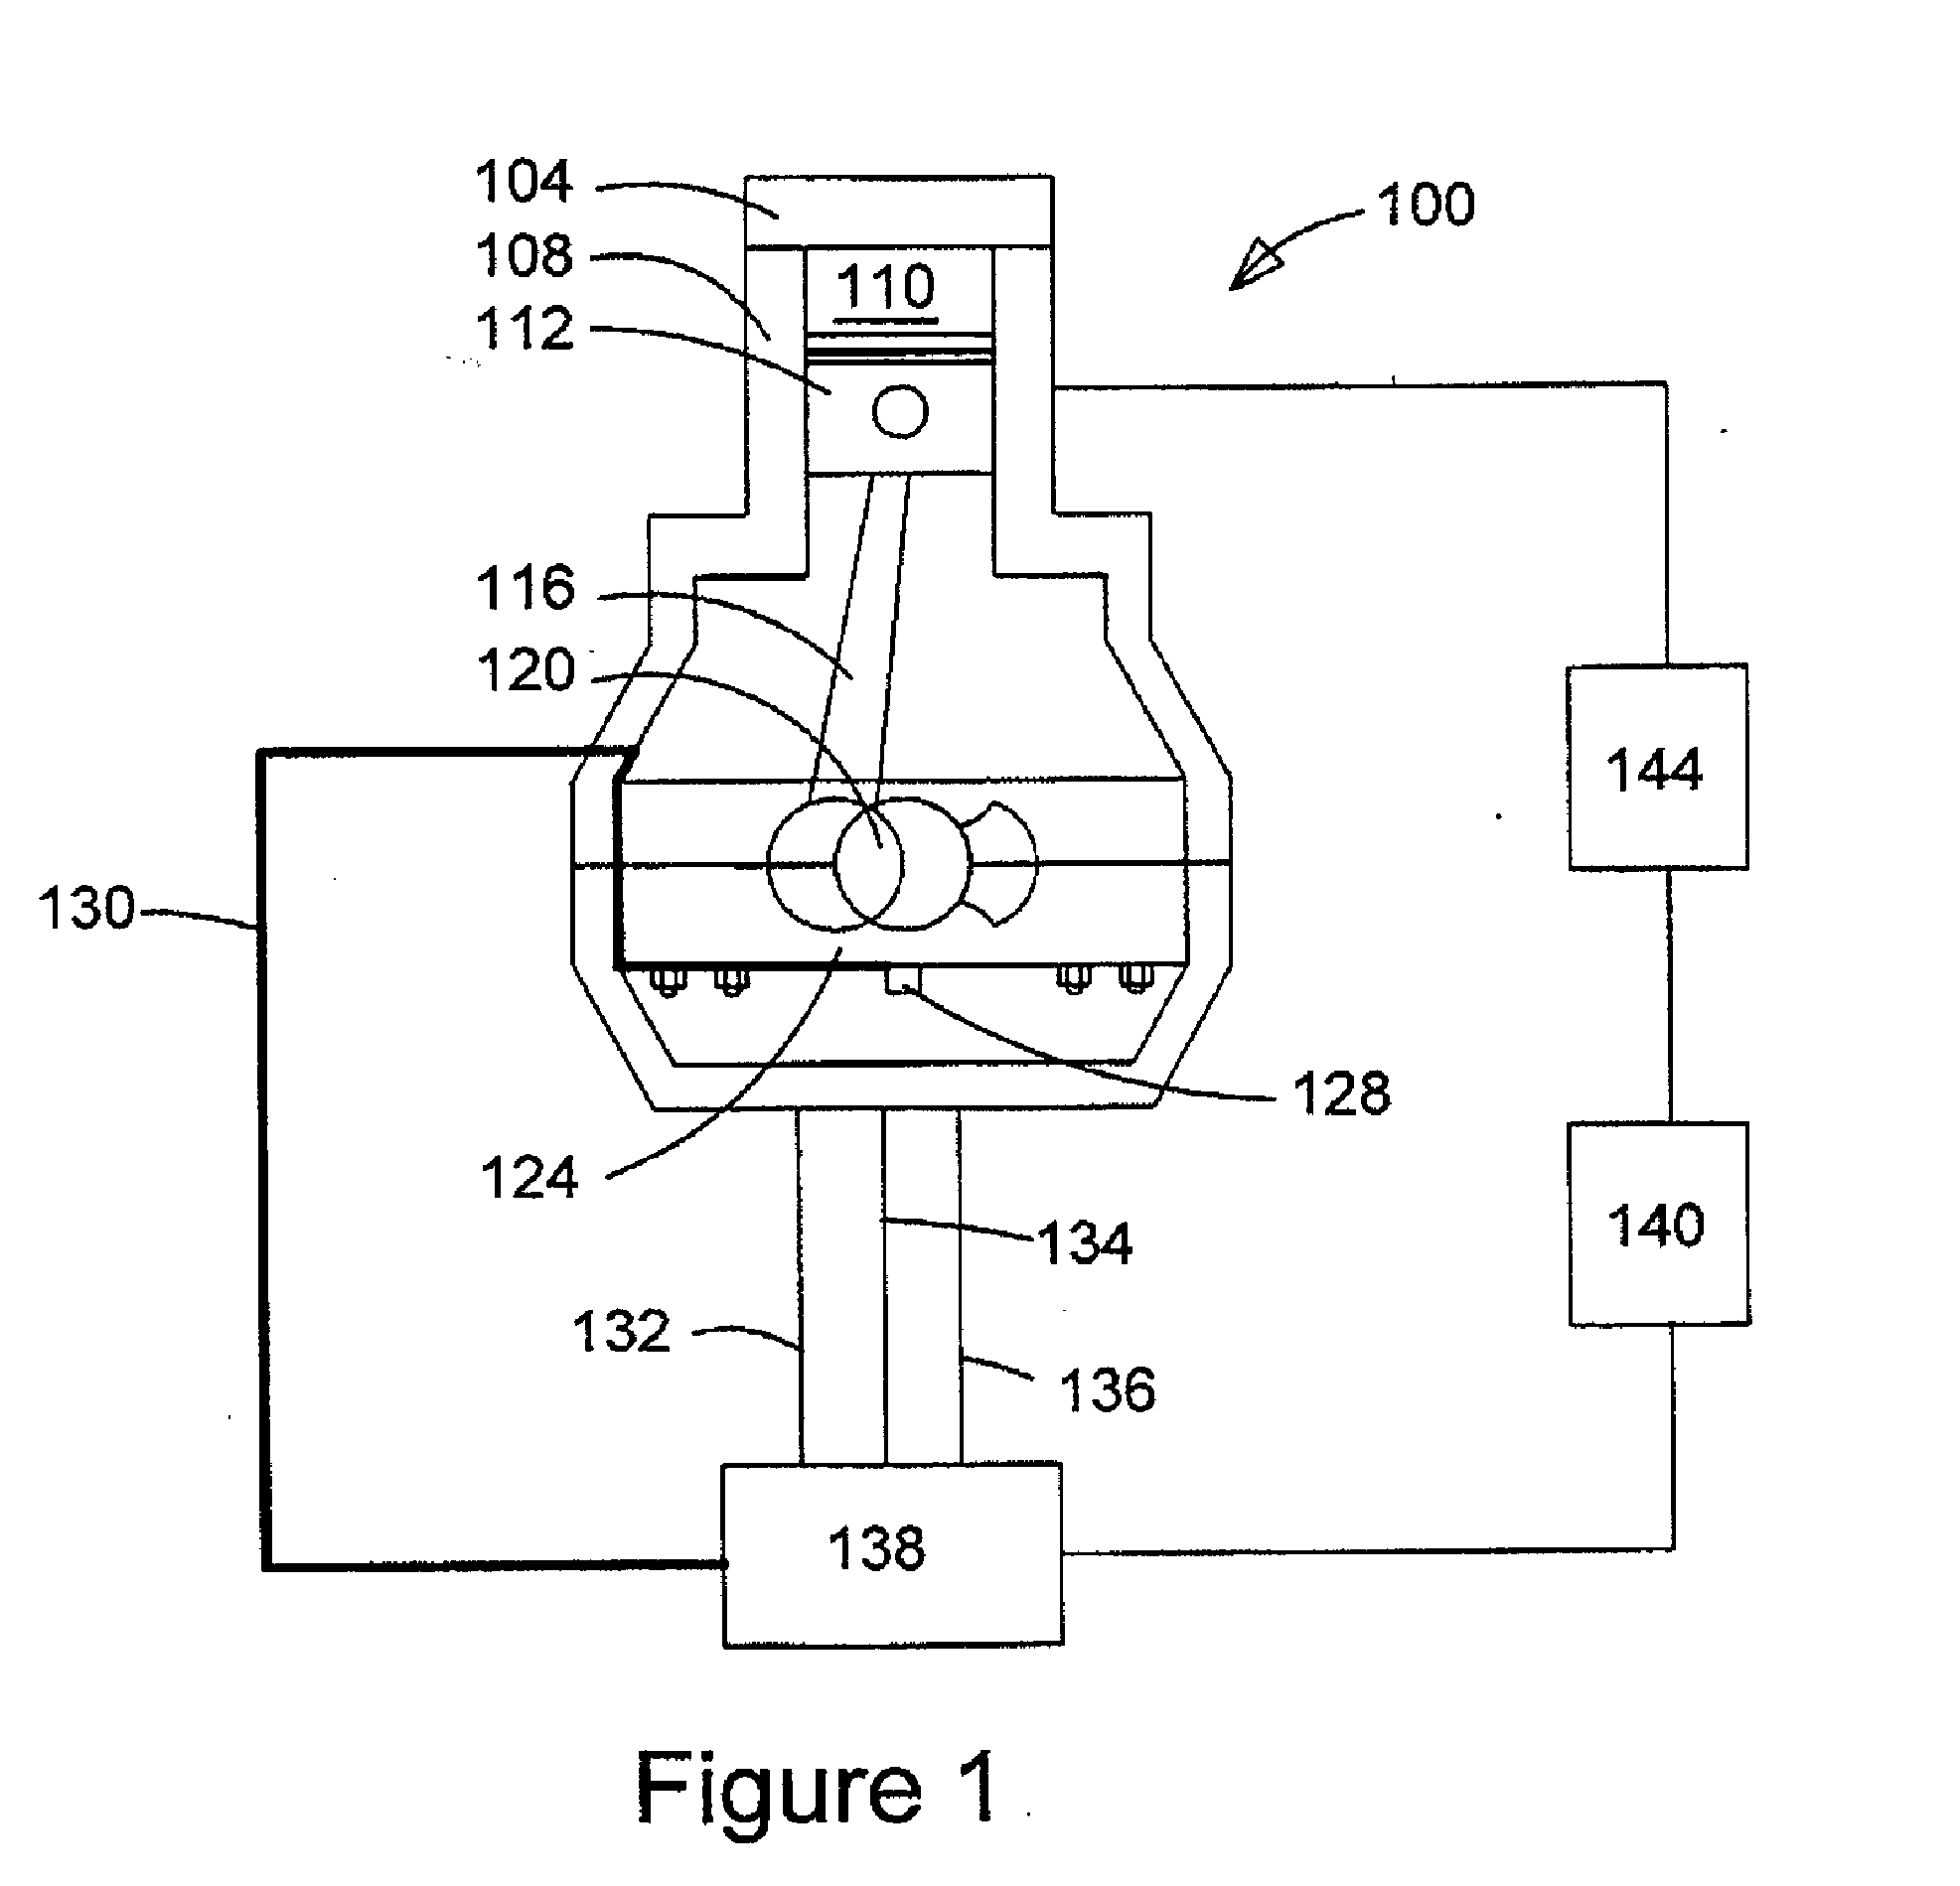 Method And Apparatus For Reconstructing In-Cylinder Pressure And Correcting For Signal Decay